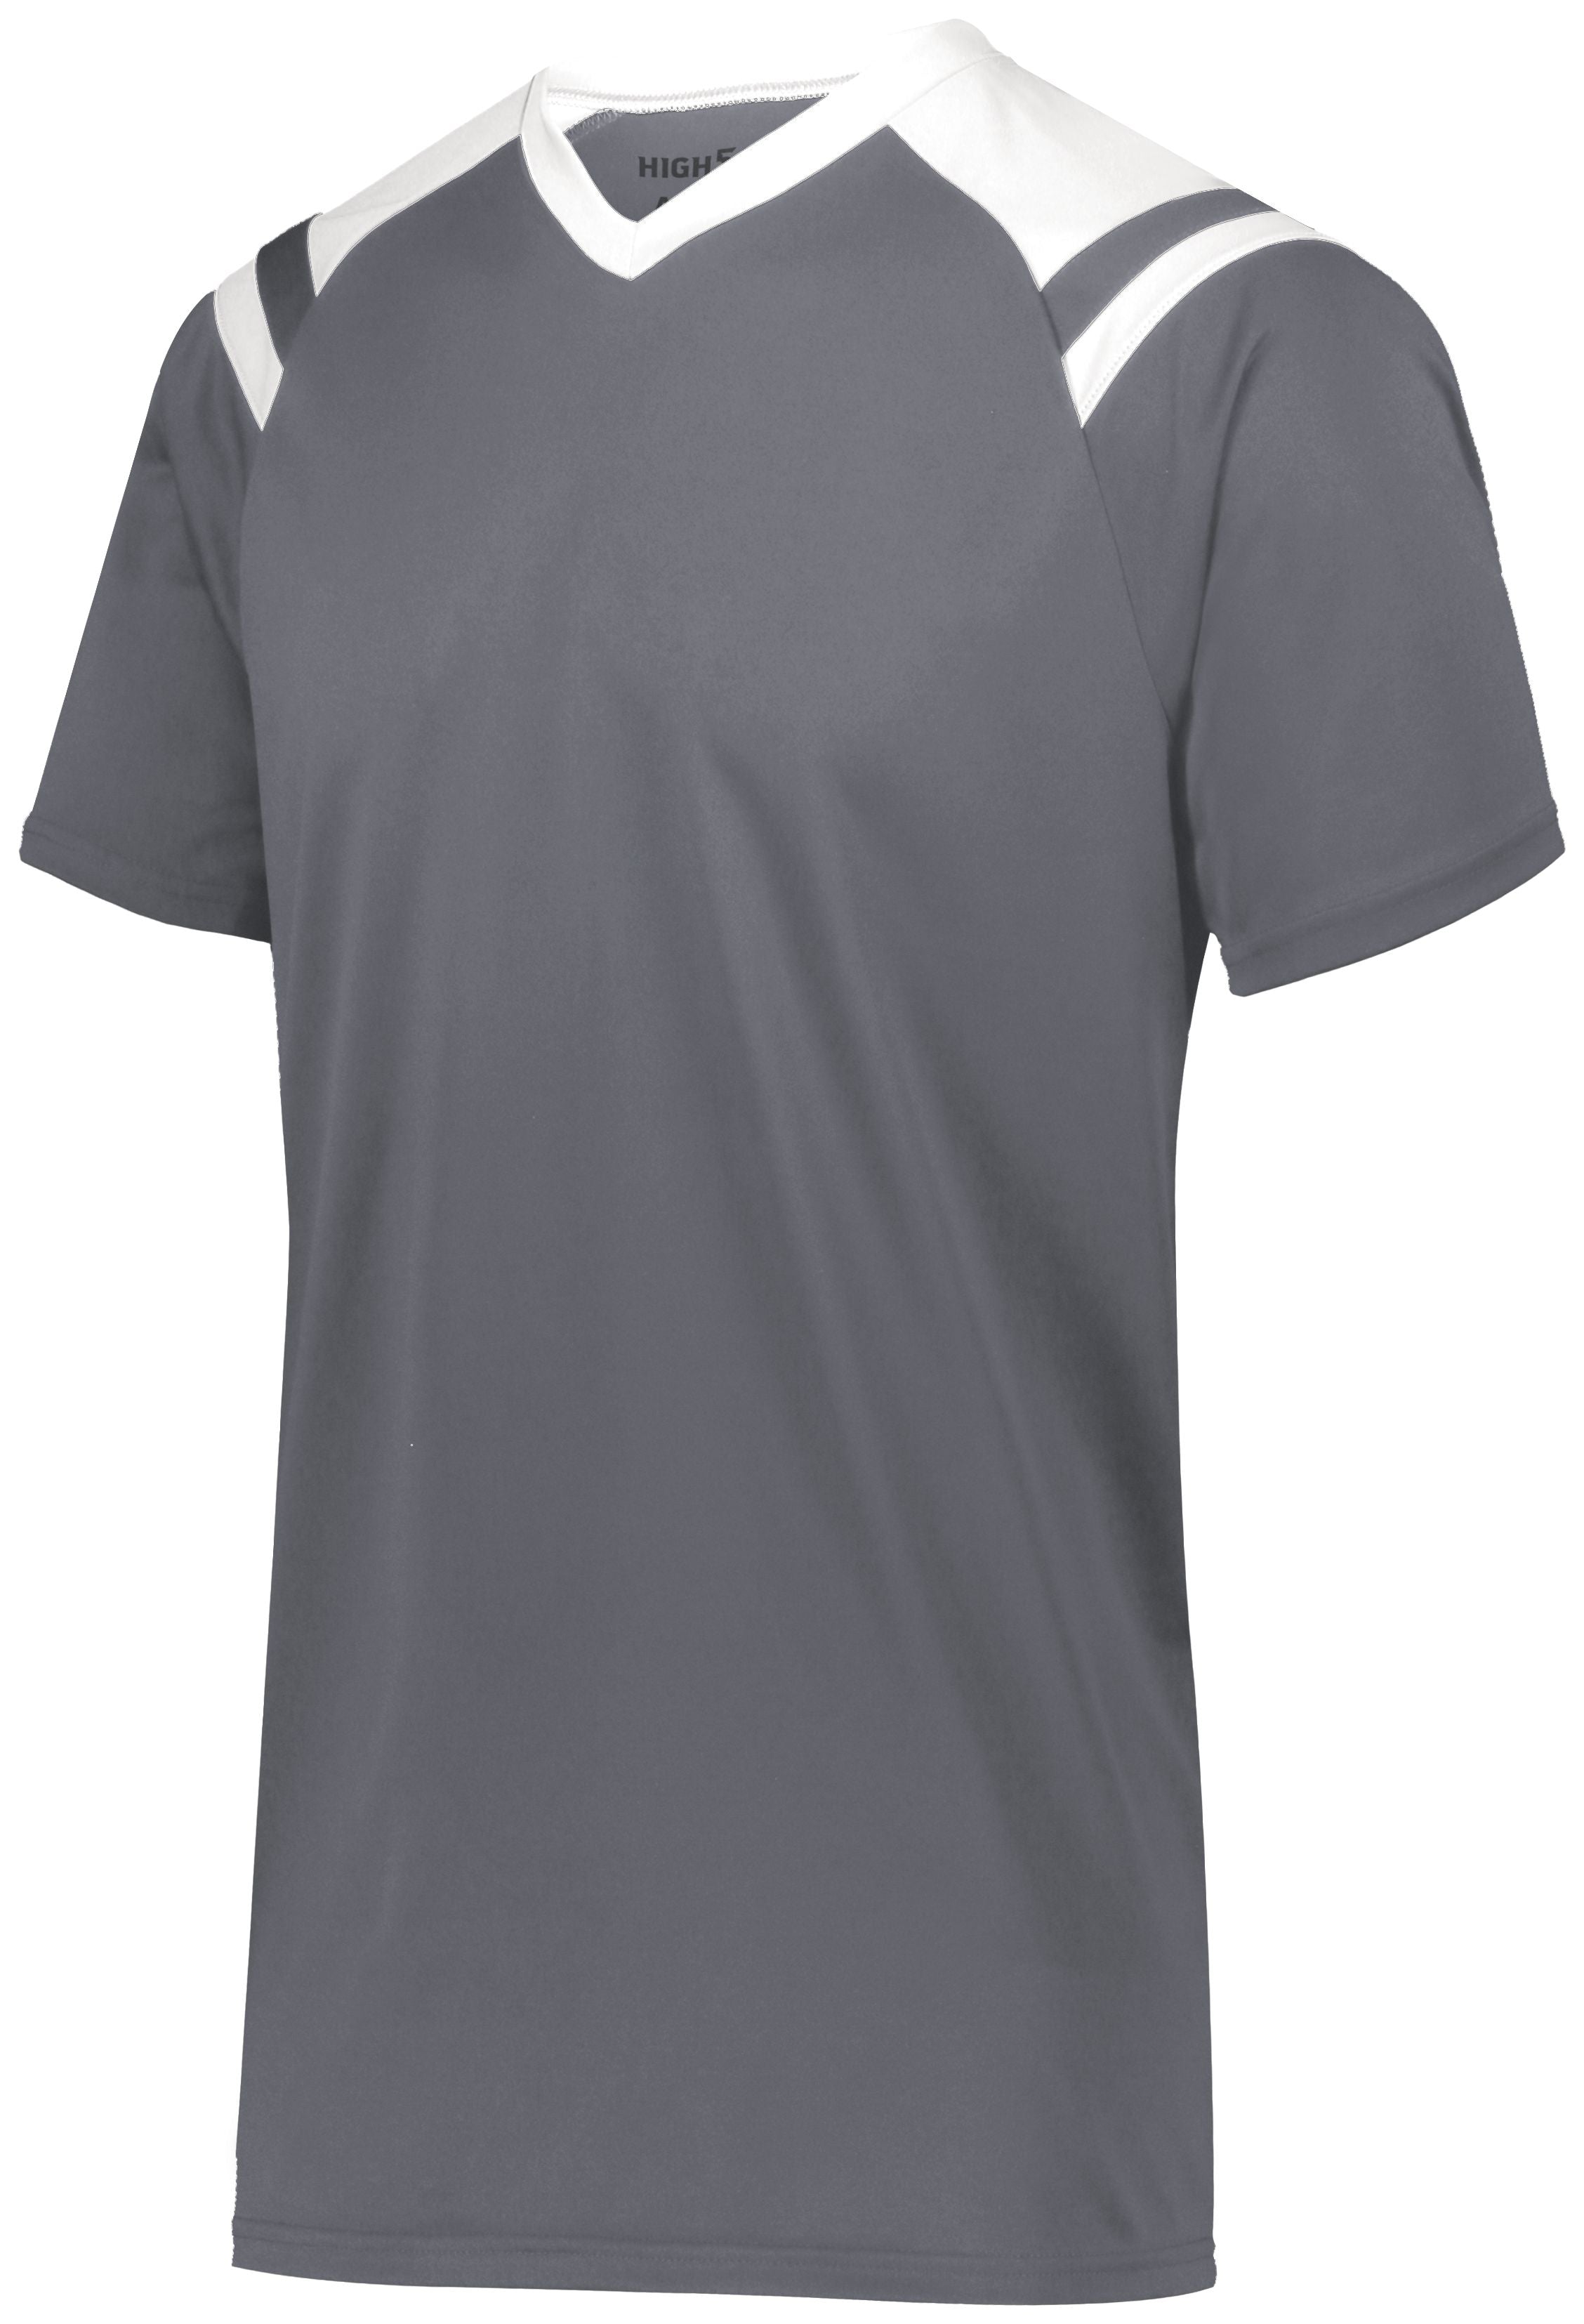 High 5 Sheffield Jersey in Graphite/White  -Part of the Adult, Adult-Jersey, High5-Products, Soccer, Shirts, All-Sports-1, Sheffield-Soccer-Jerseys product lines at KanaleyCreations.com